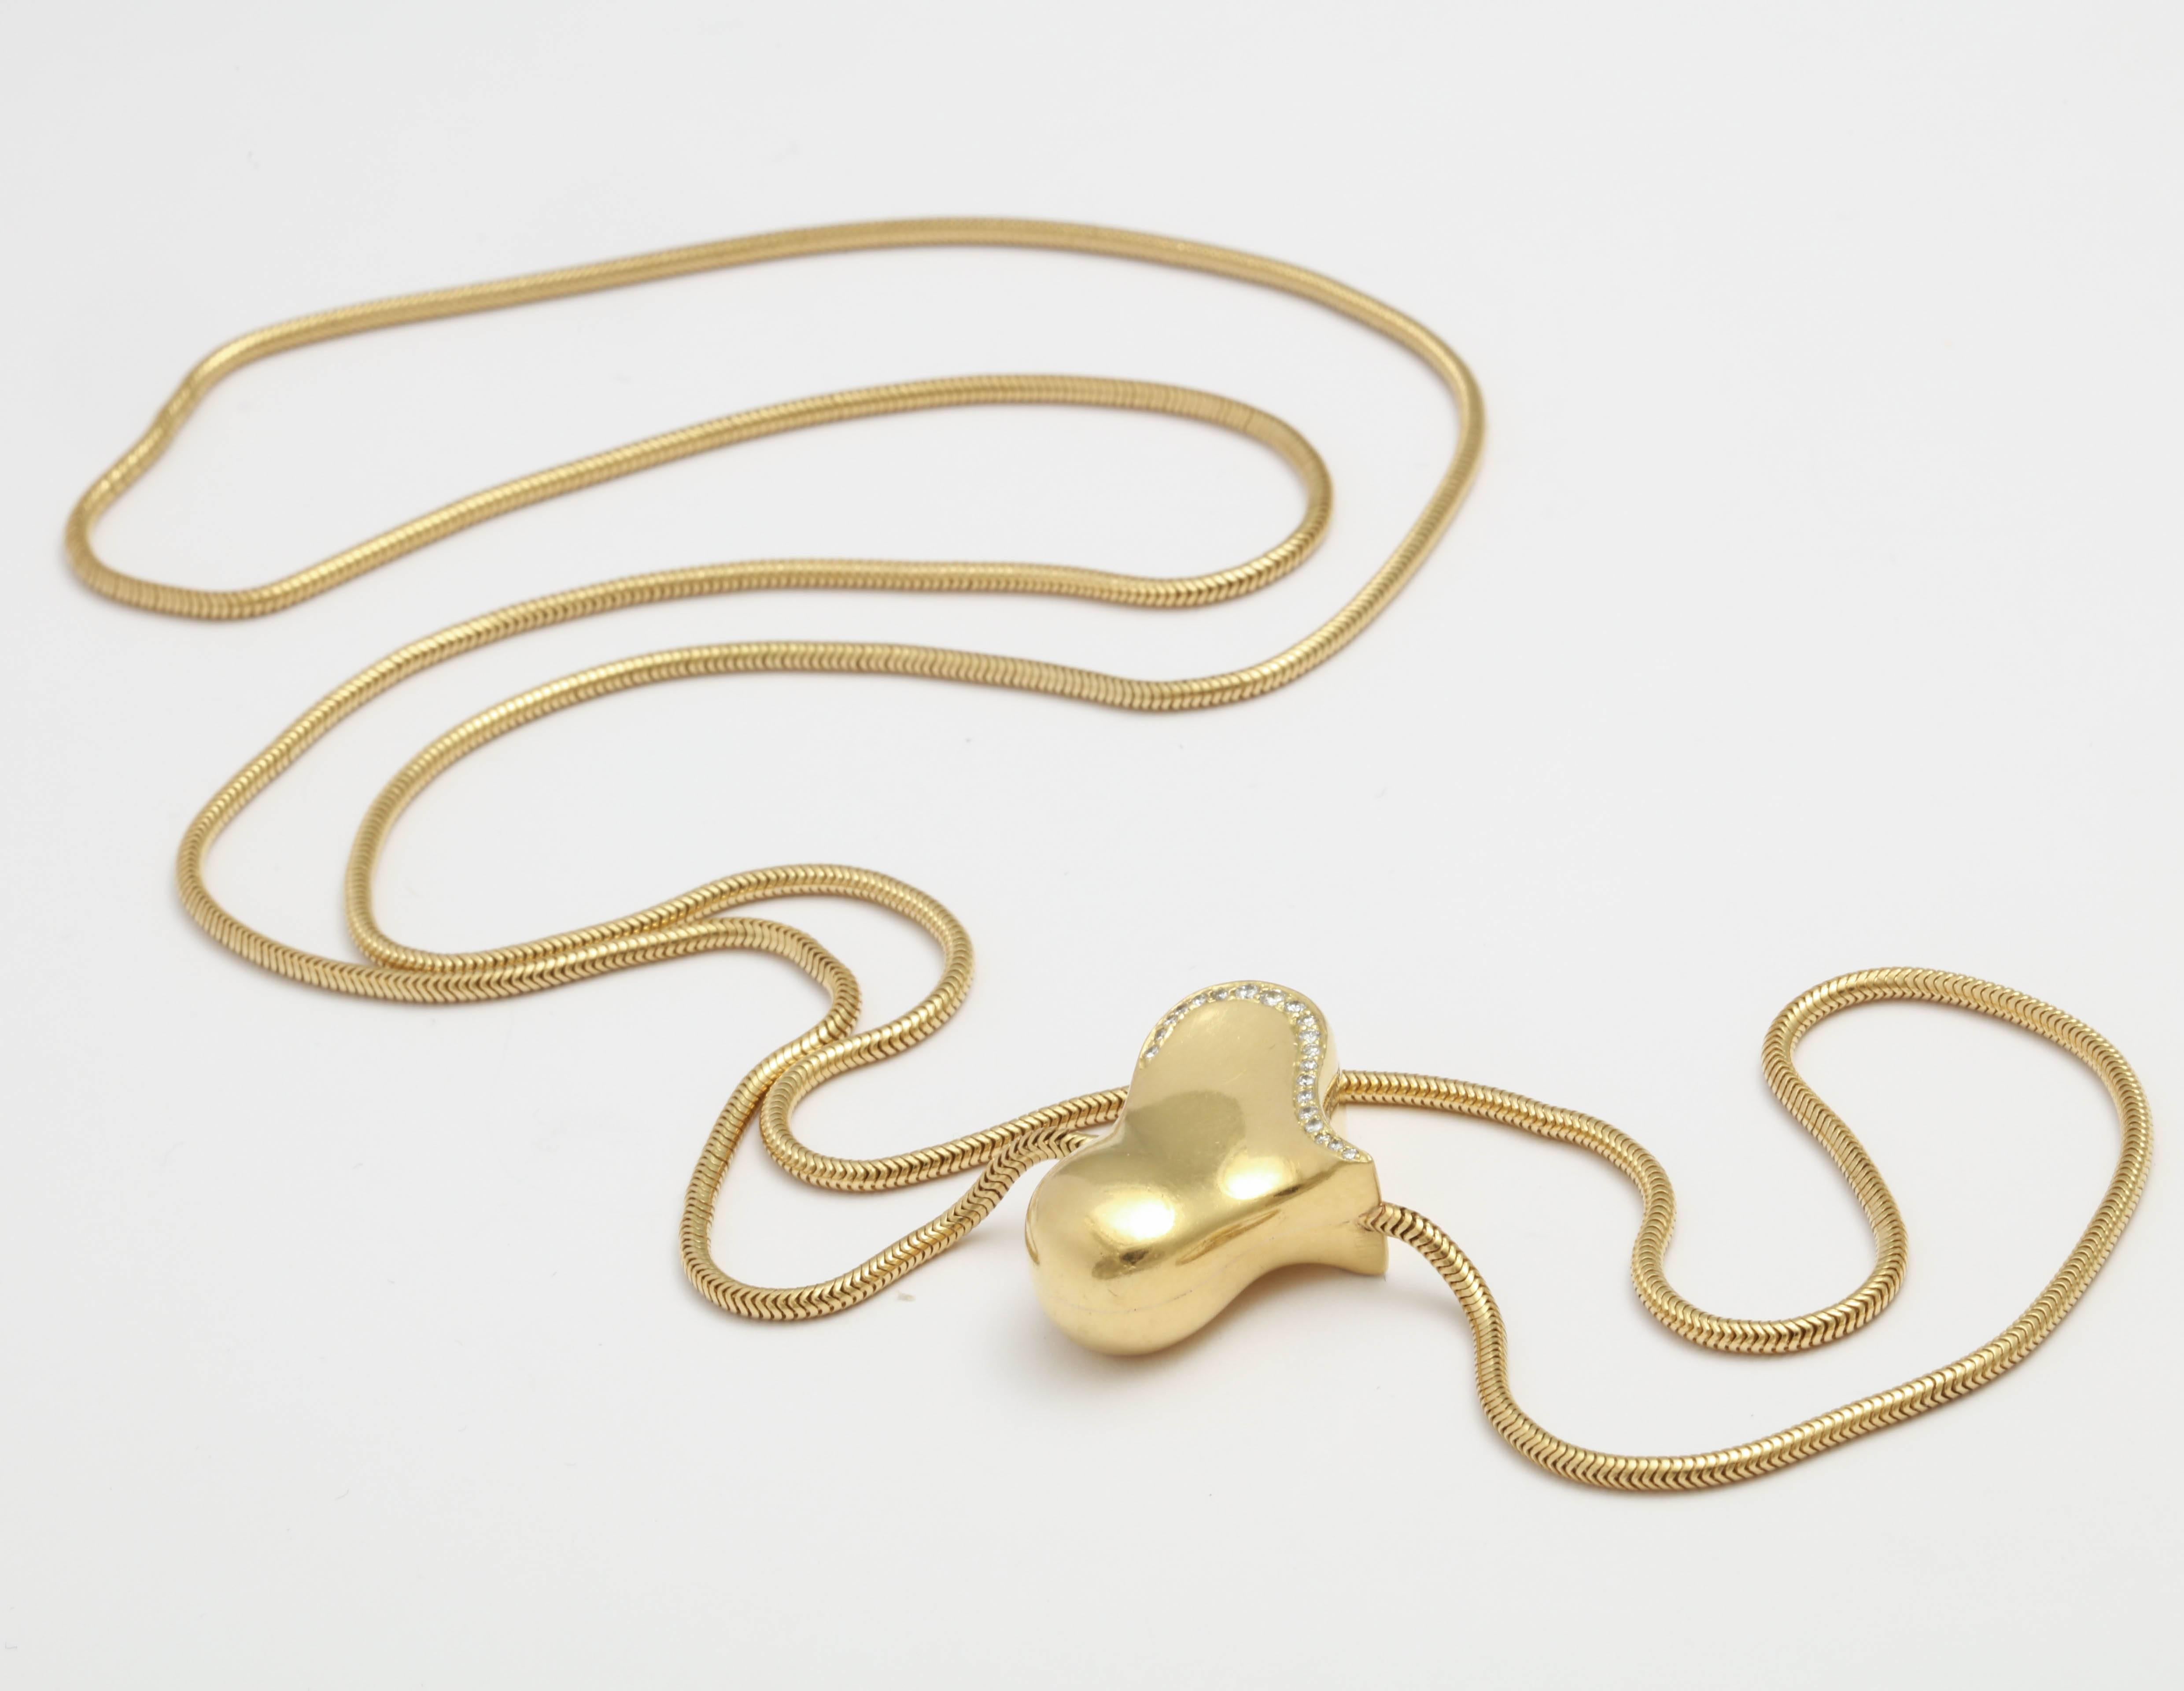 Early Angela Cummings 18kt Gold Snake chain with a Gold & Diamond studded Heart attached in-between the chain
Double sided Heart with a border of 20 Diamonds pave set on each side.  Signed@1984Cummings18. on both sides. Can be worn singly or doubled